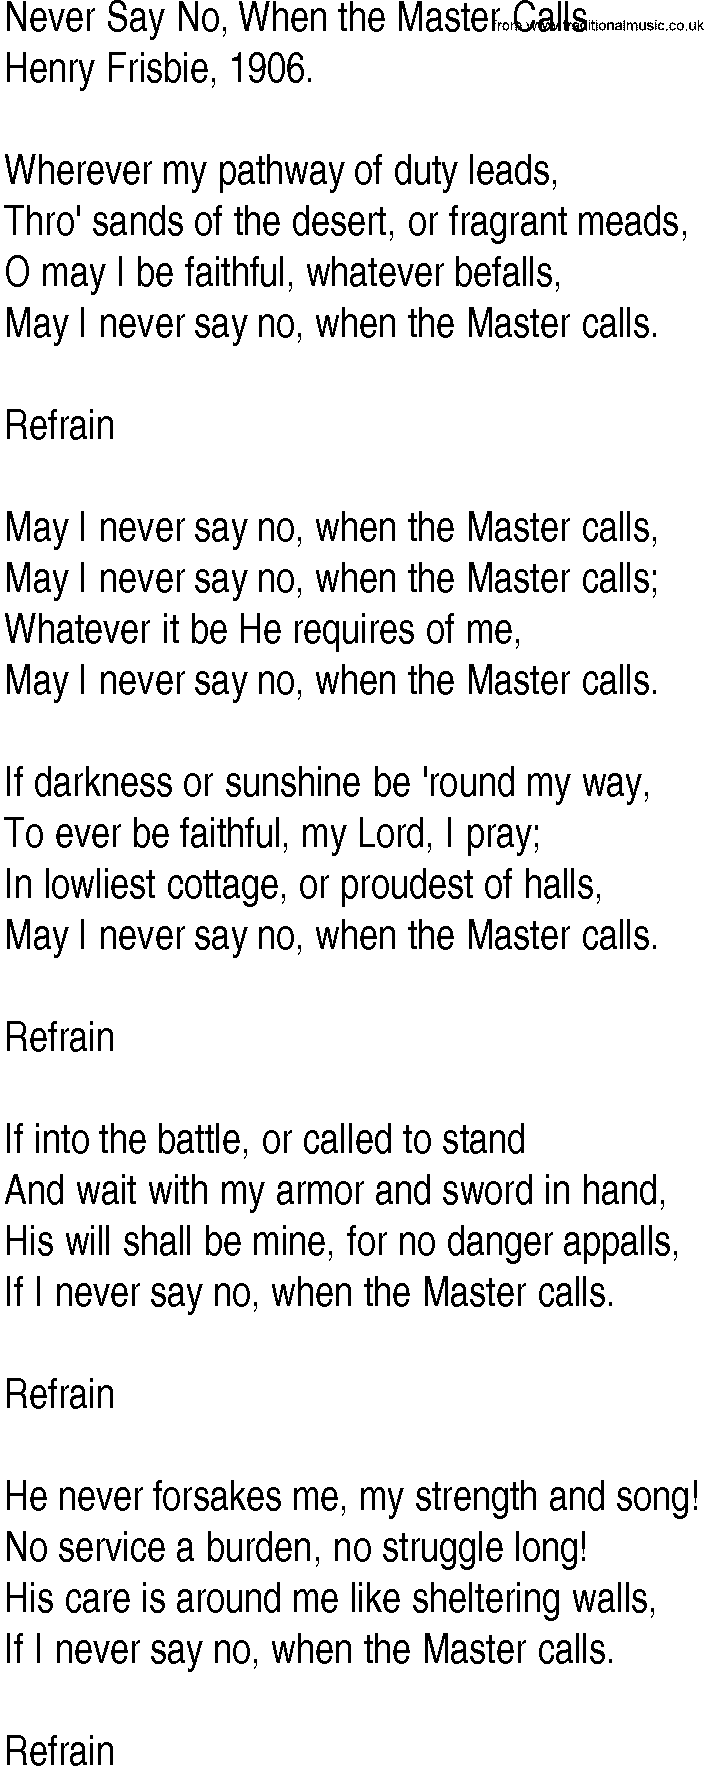 Hymn and Gospel Song: Never Say No, When the Master Calls by Henry Frisbie lyrics